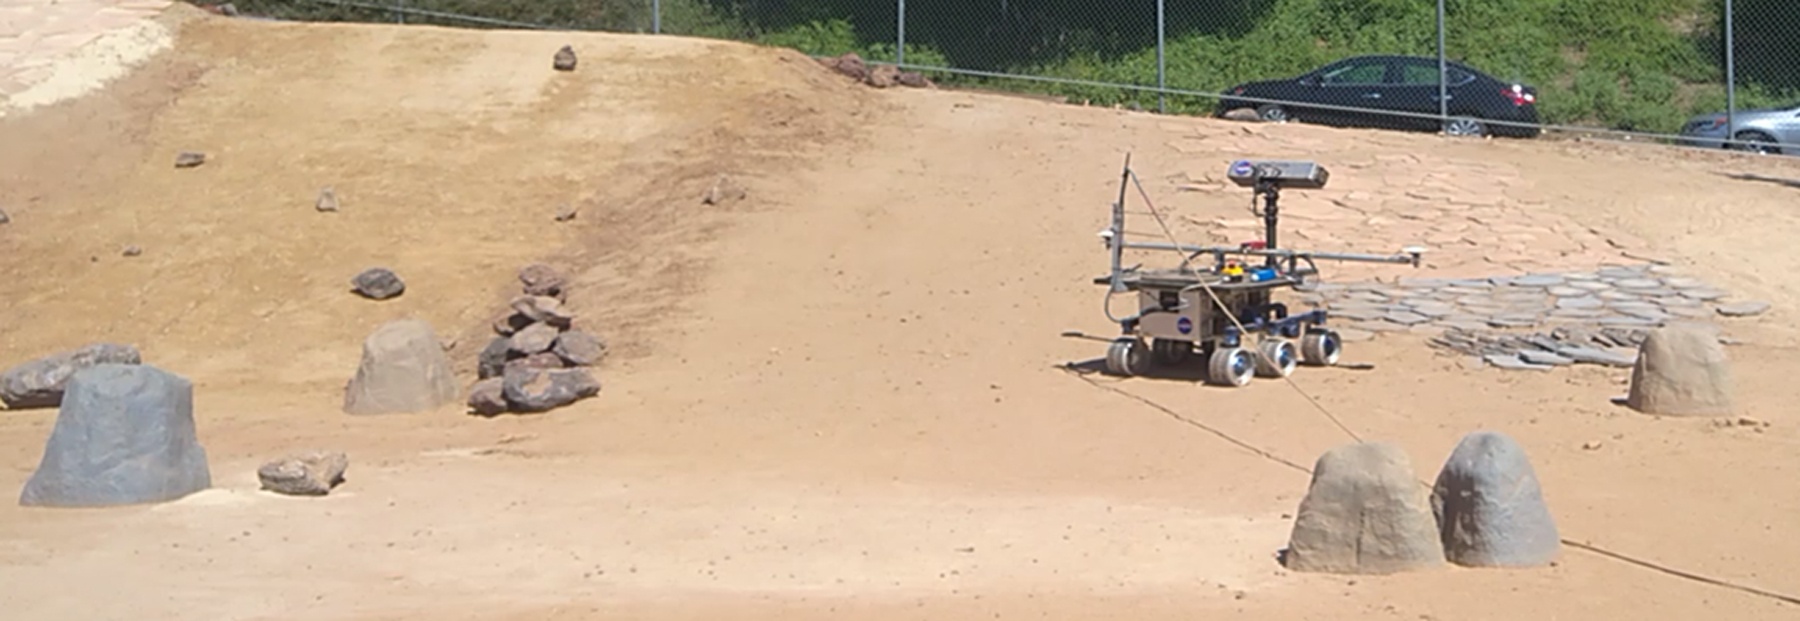 Athena Rover in the Mars Yard. MONSID uncovered faults that would have fooled traditional monitors. Credit Okean Solutions.